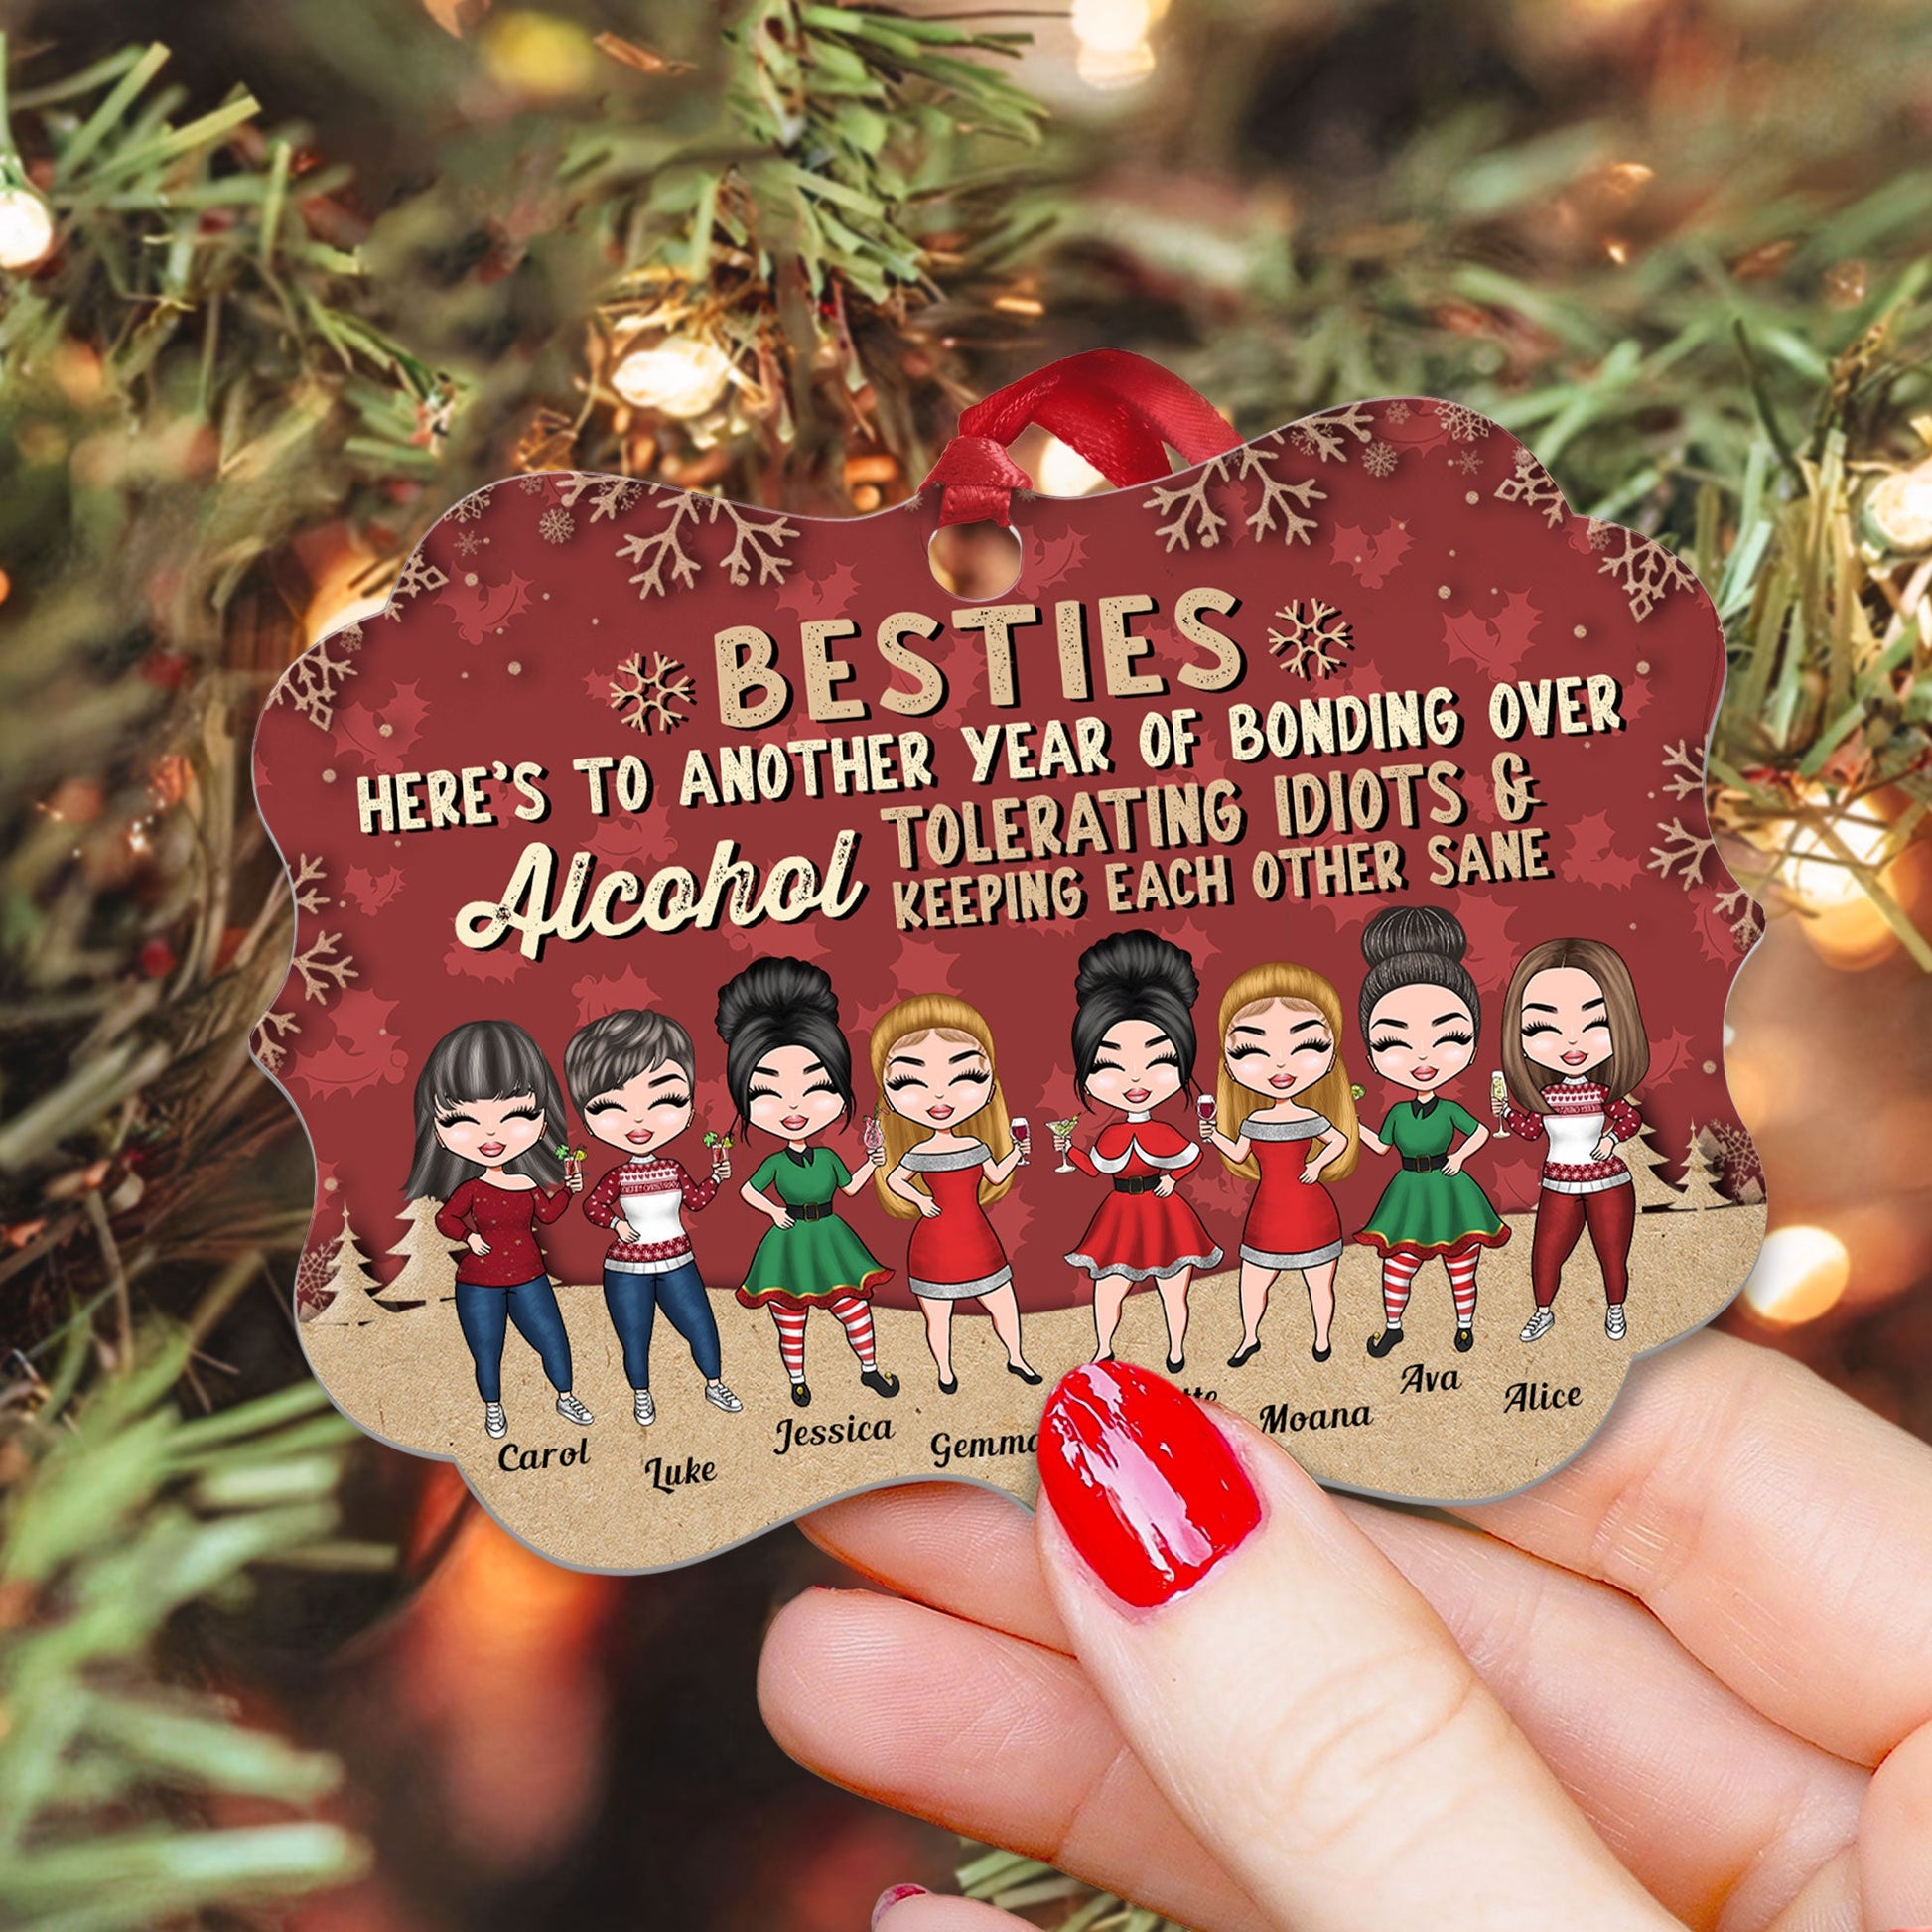 Best Neighbor Ever, Quote & Photo Gift Glass Ornament